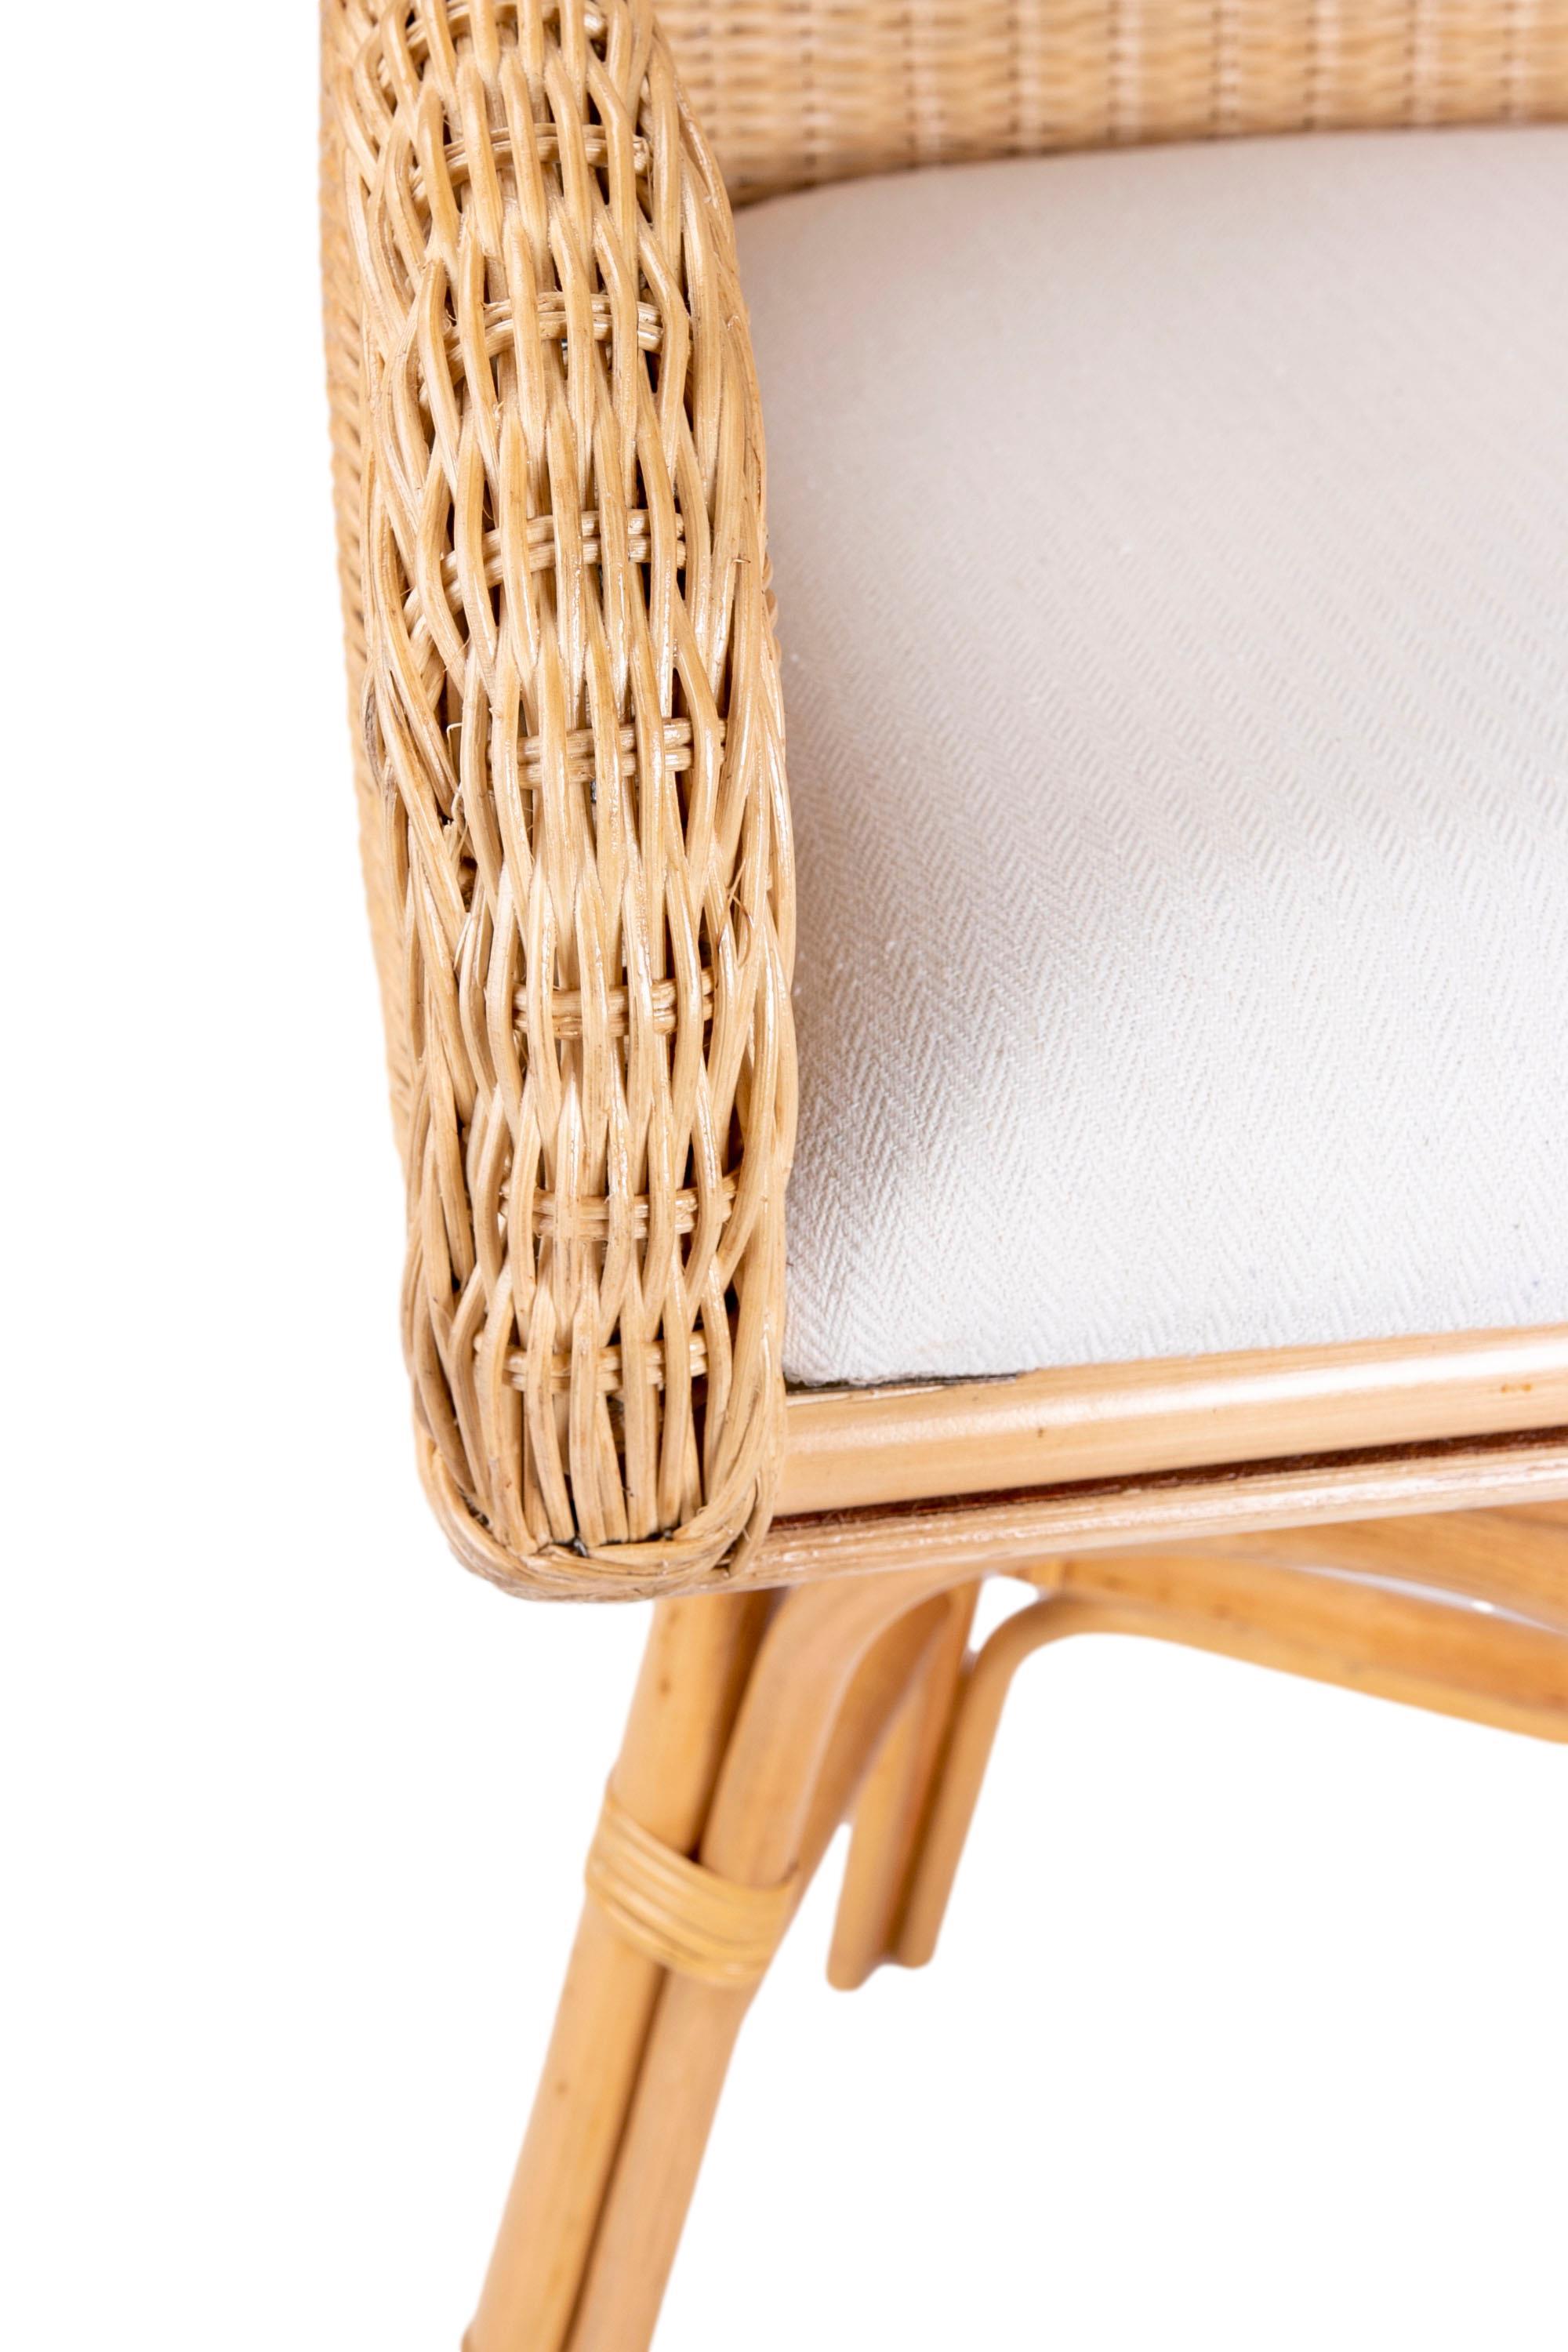 Upholstered Rattan and Wicker Bar stool with Sideways Movement 13